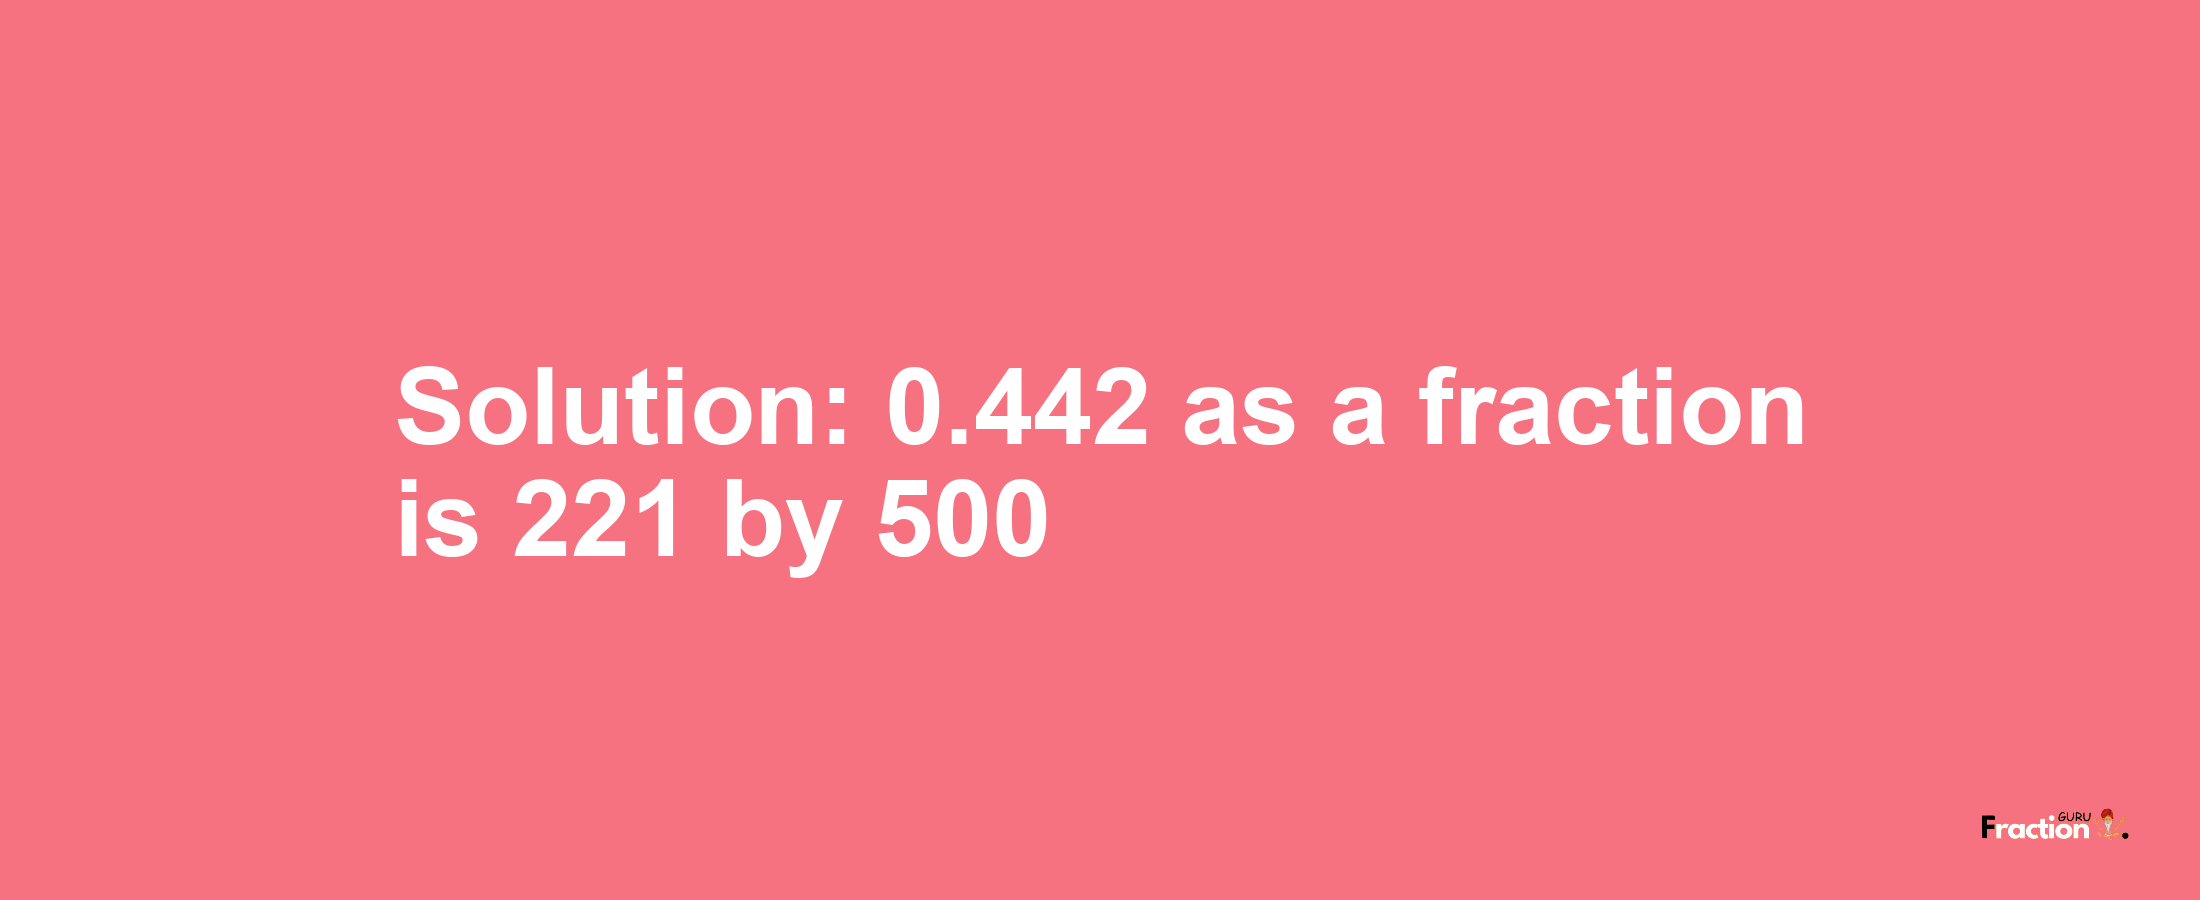 Solution:0.442 as a fraction is 221/500